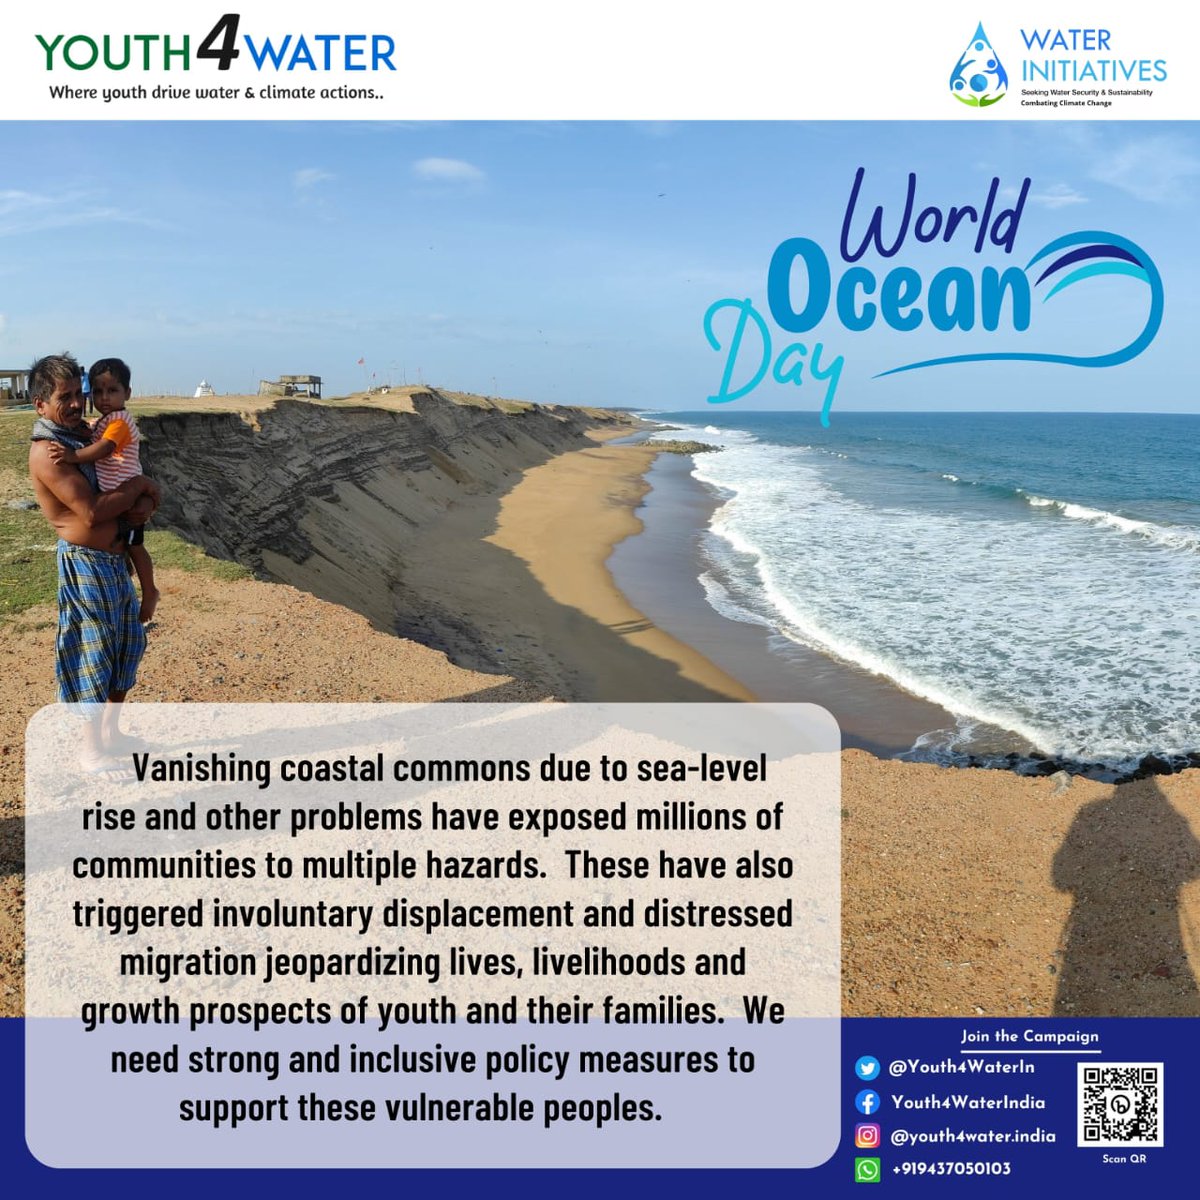 On #WorldOceansDay, we reaffirm our commitment to work together with #VulnerableCommunities impacted by #SeaLevelRise and related problems for ensuring #ClimateJustice. 
#Together4CoastalCommons 
#RelocationWithDignity
#JustMobility
#InclusiveClimateFinance 
#Youth4WaterIndia